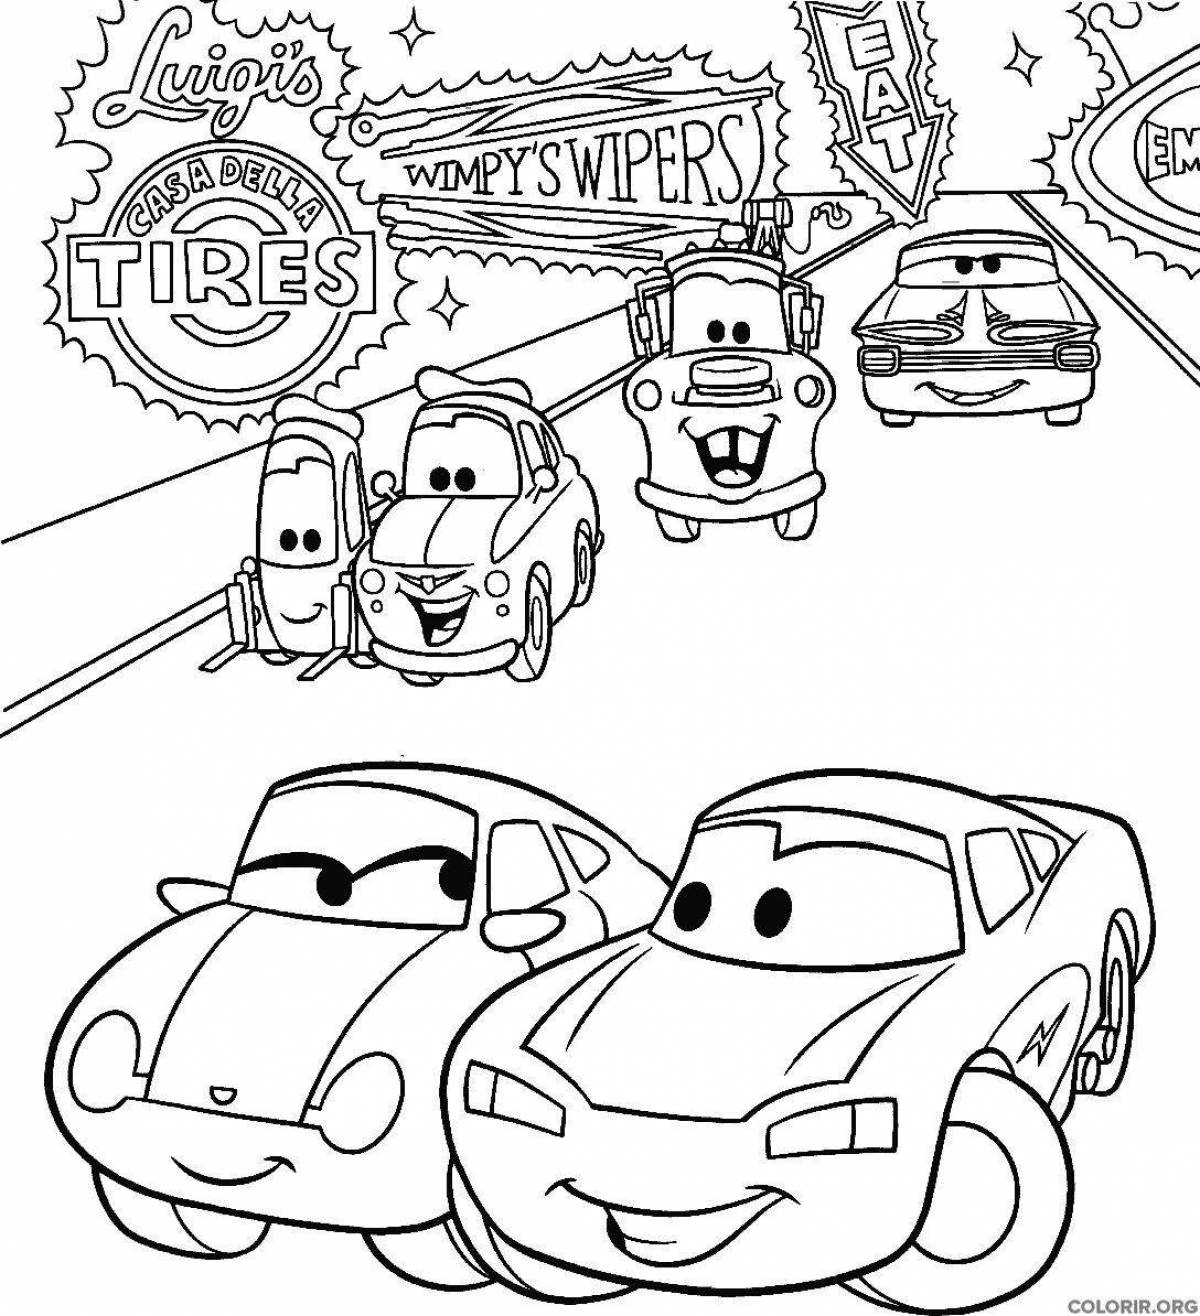 Coloring page joyful makvin for children 3-4 years old